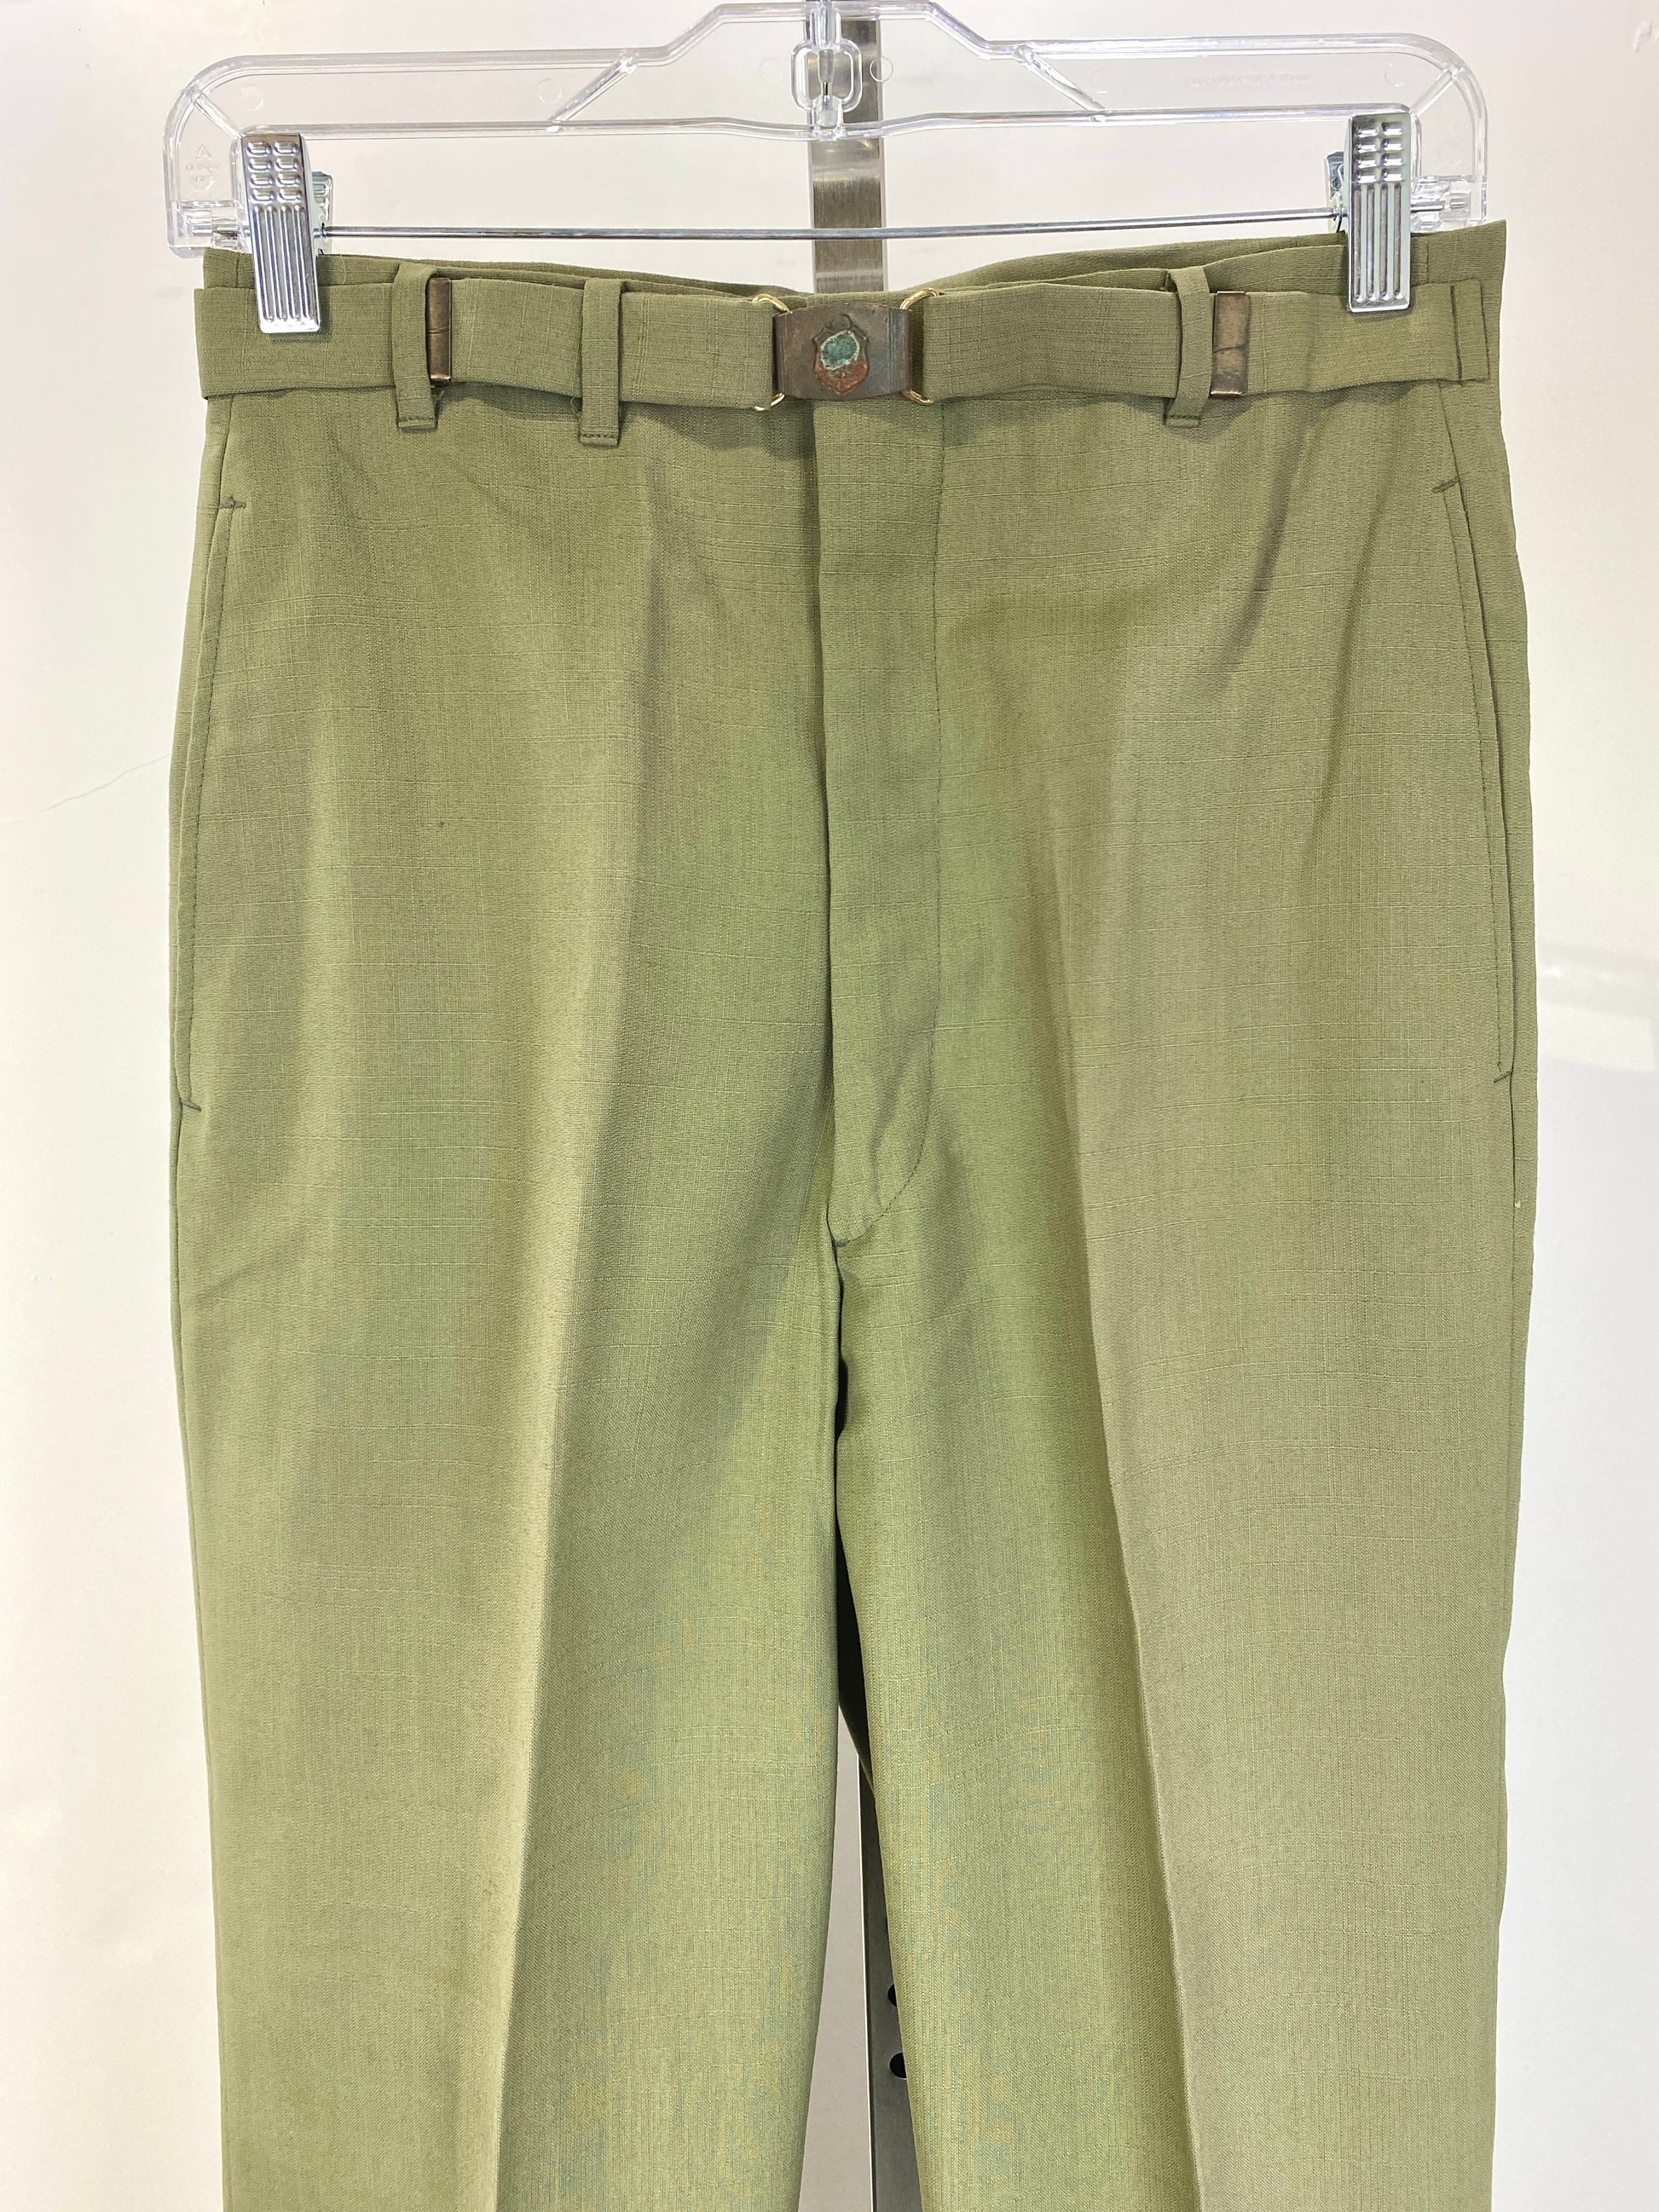 Men's Polyester Trousers